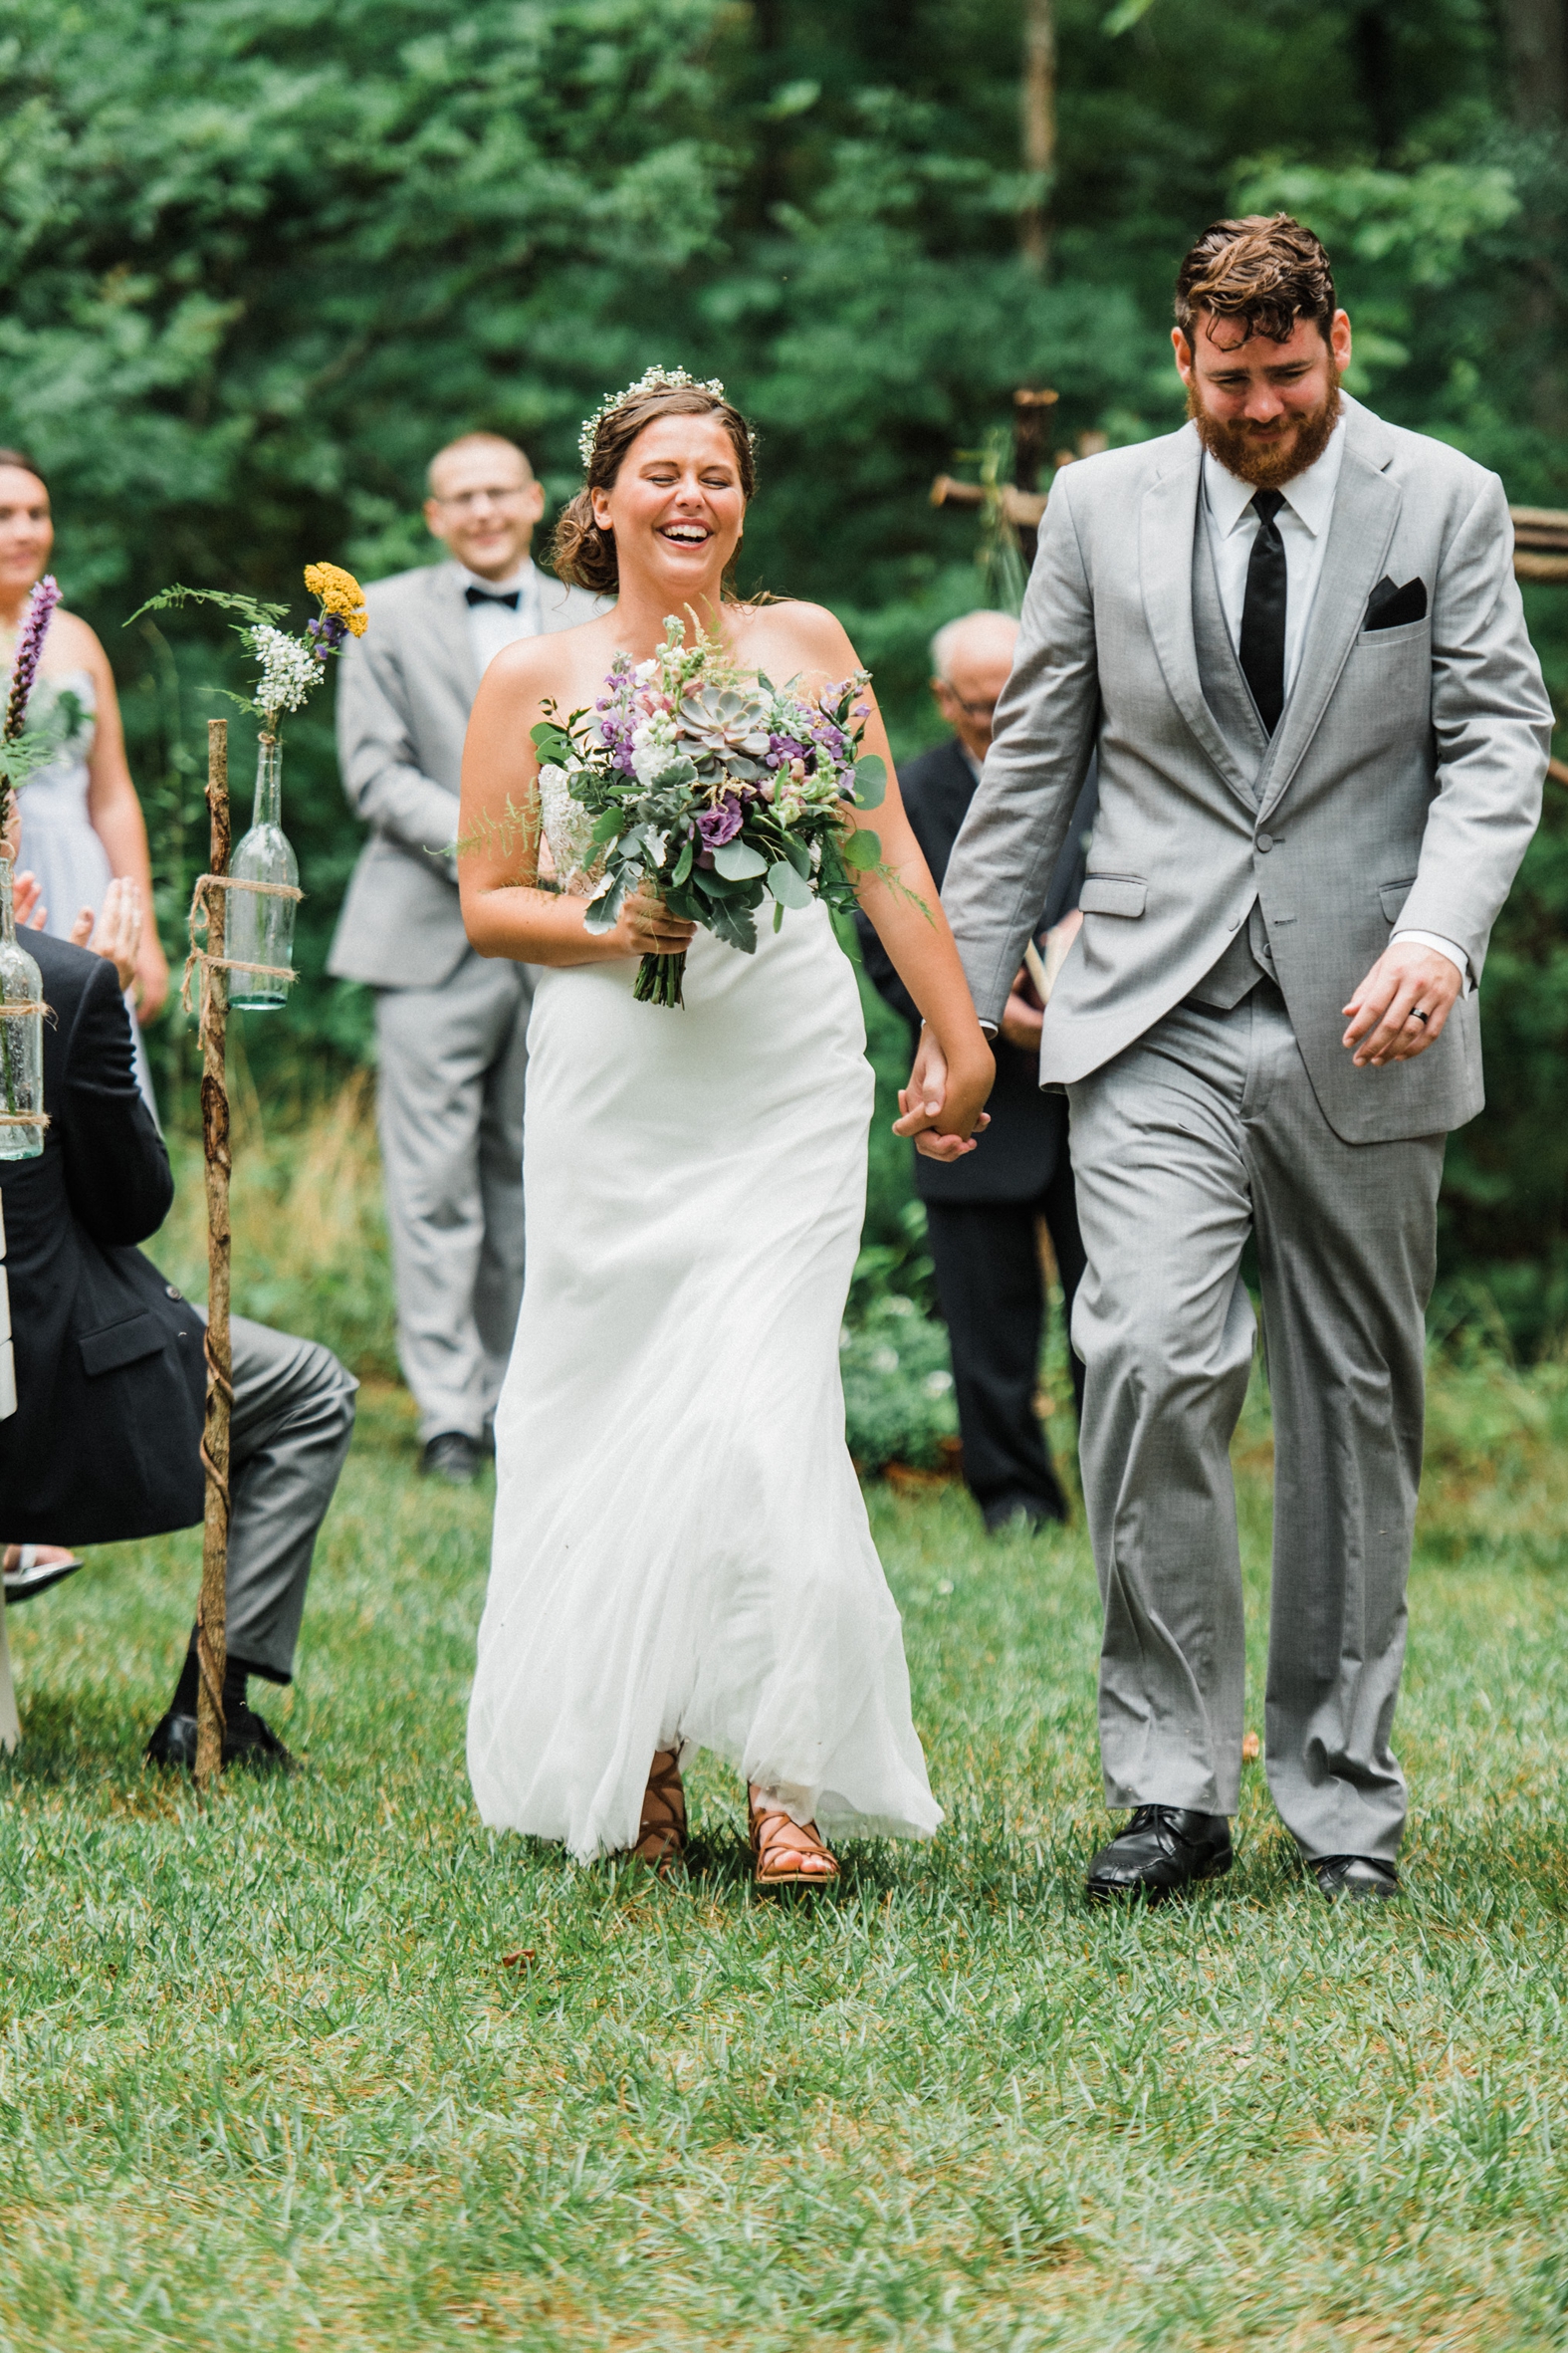 Bride and groom laughing at outdoor wedding ceremony; groom in gray suit with black tie; bride with purple, succulent, and eucalyptus bouquet.